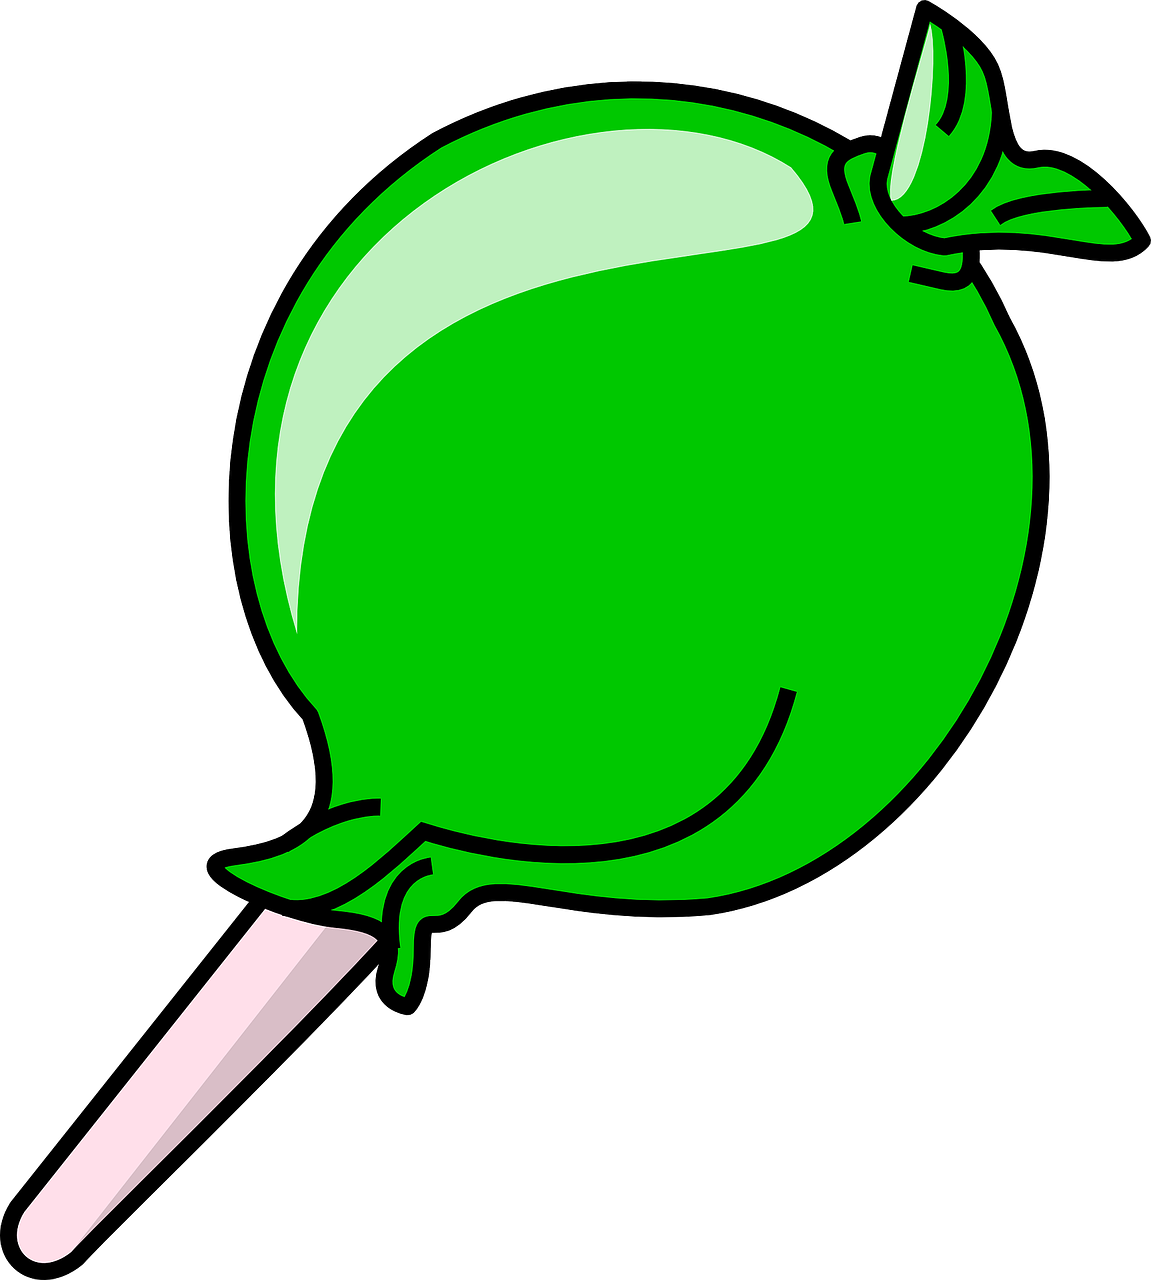 lollipop,candy,sugar,food,kids,wrapped,green,stick,childhood,fun,lollypop,confection,confectionery,free vector graphics,free pictures, free photos, free images, royalty free, free illustrations, public domain